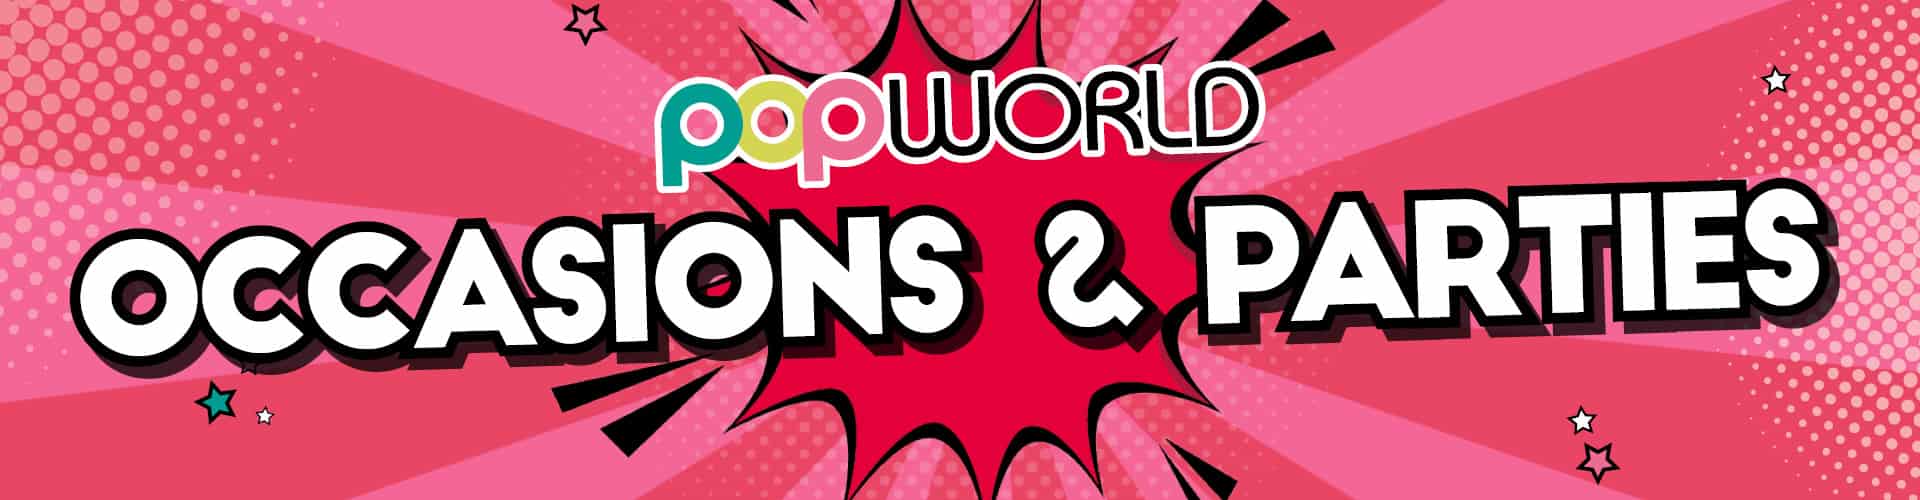 Occasions and Parties at Popworld Glasgow